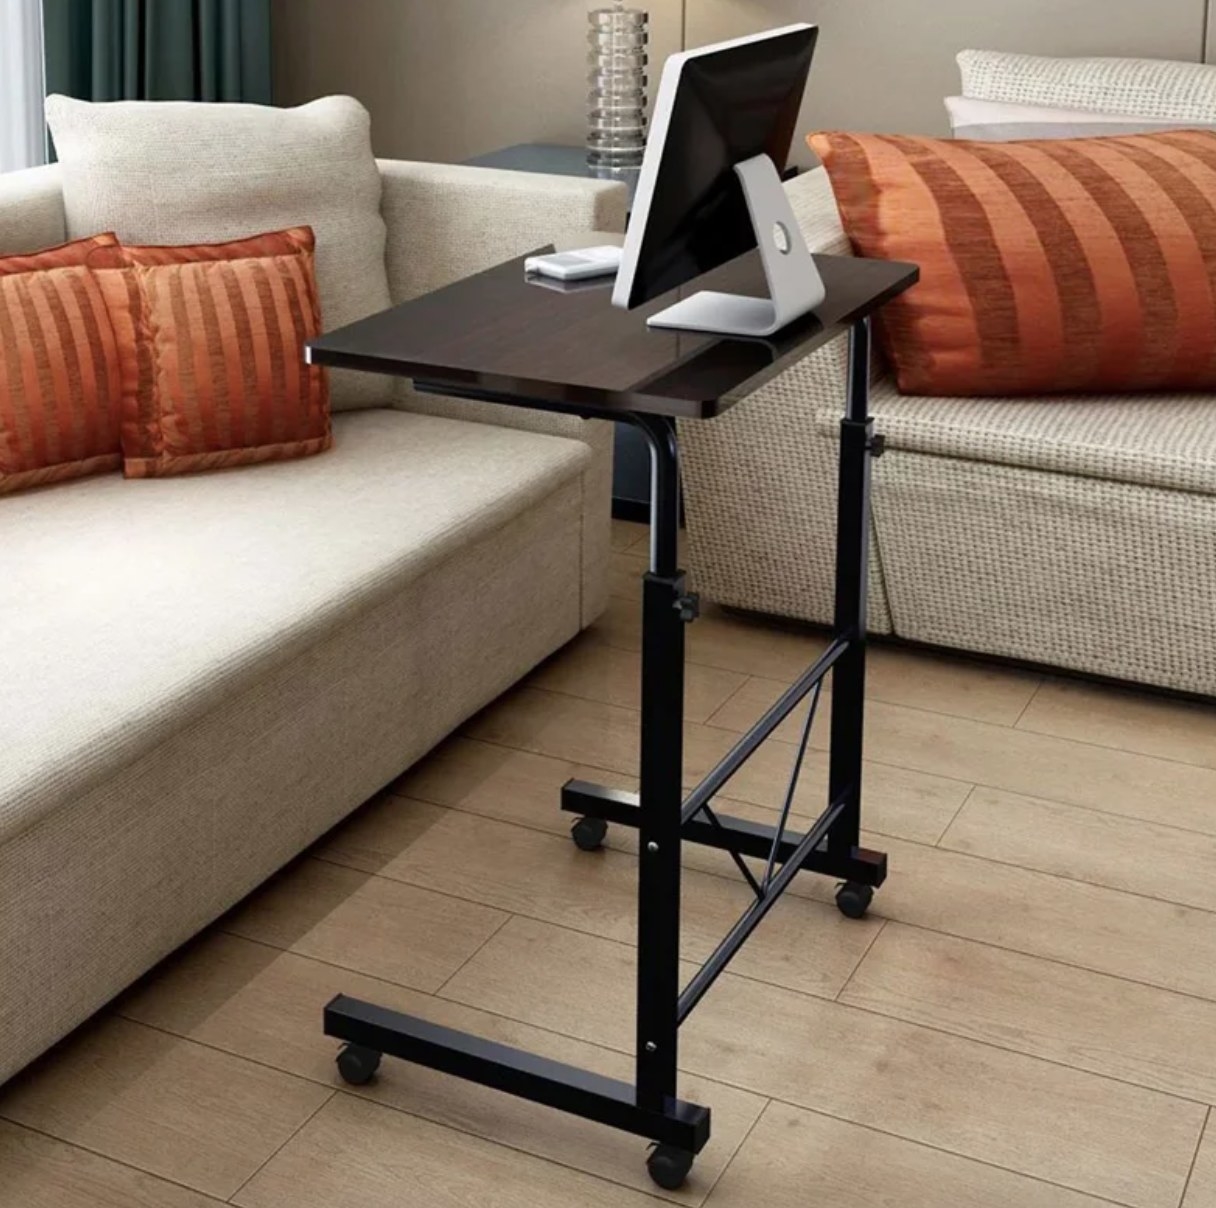 The standing desk next to a couch